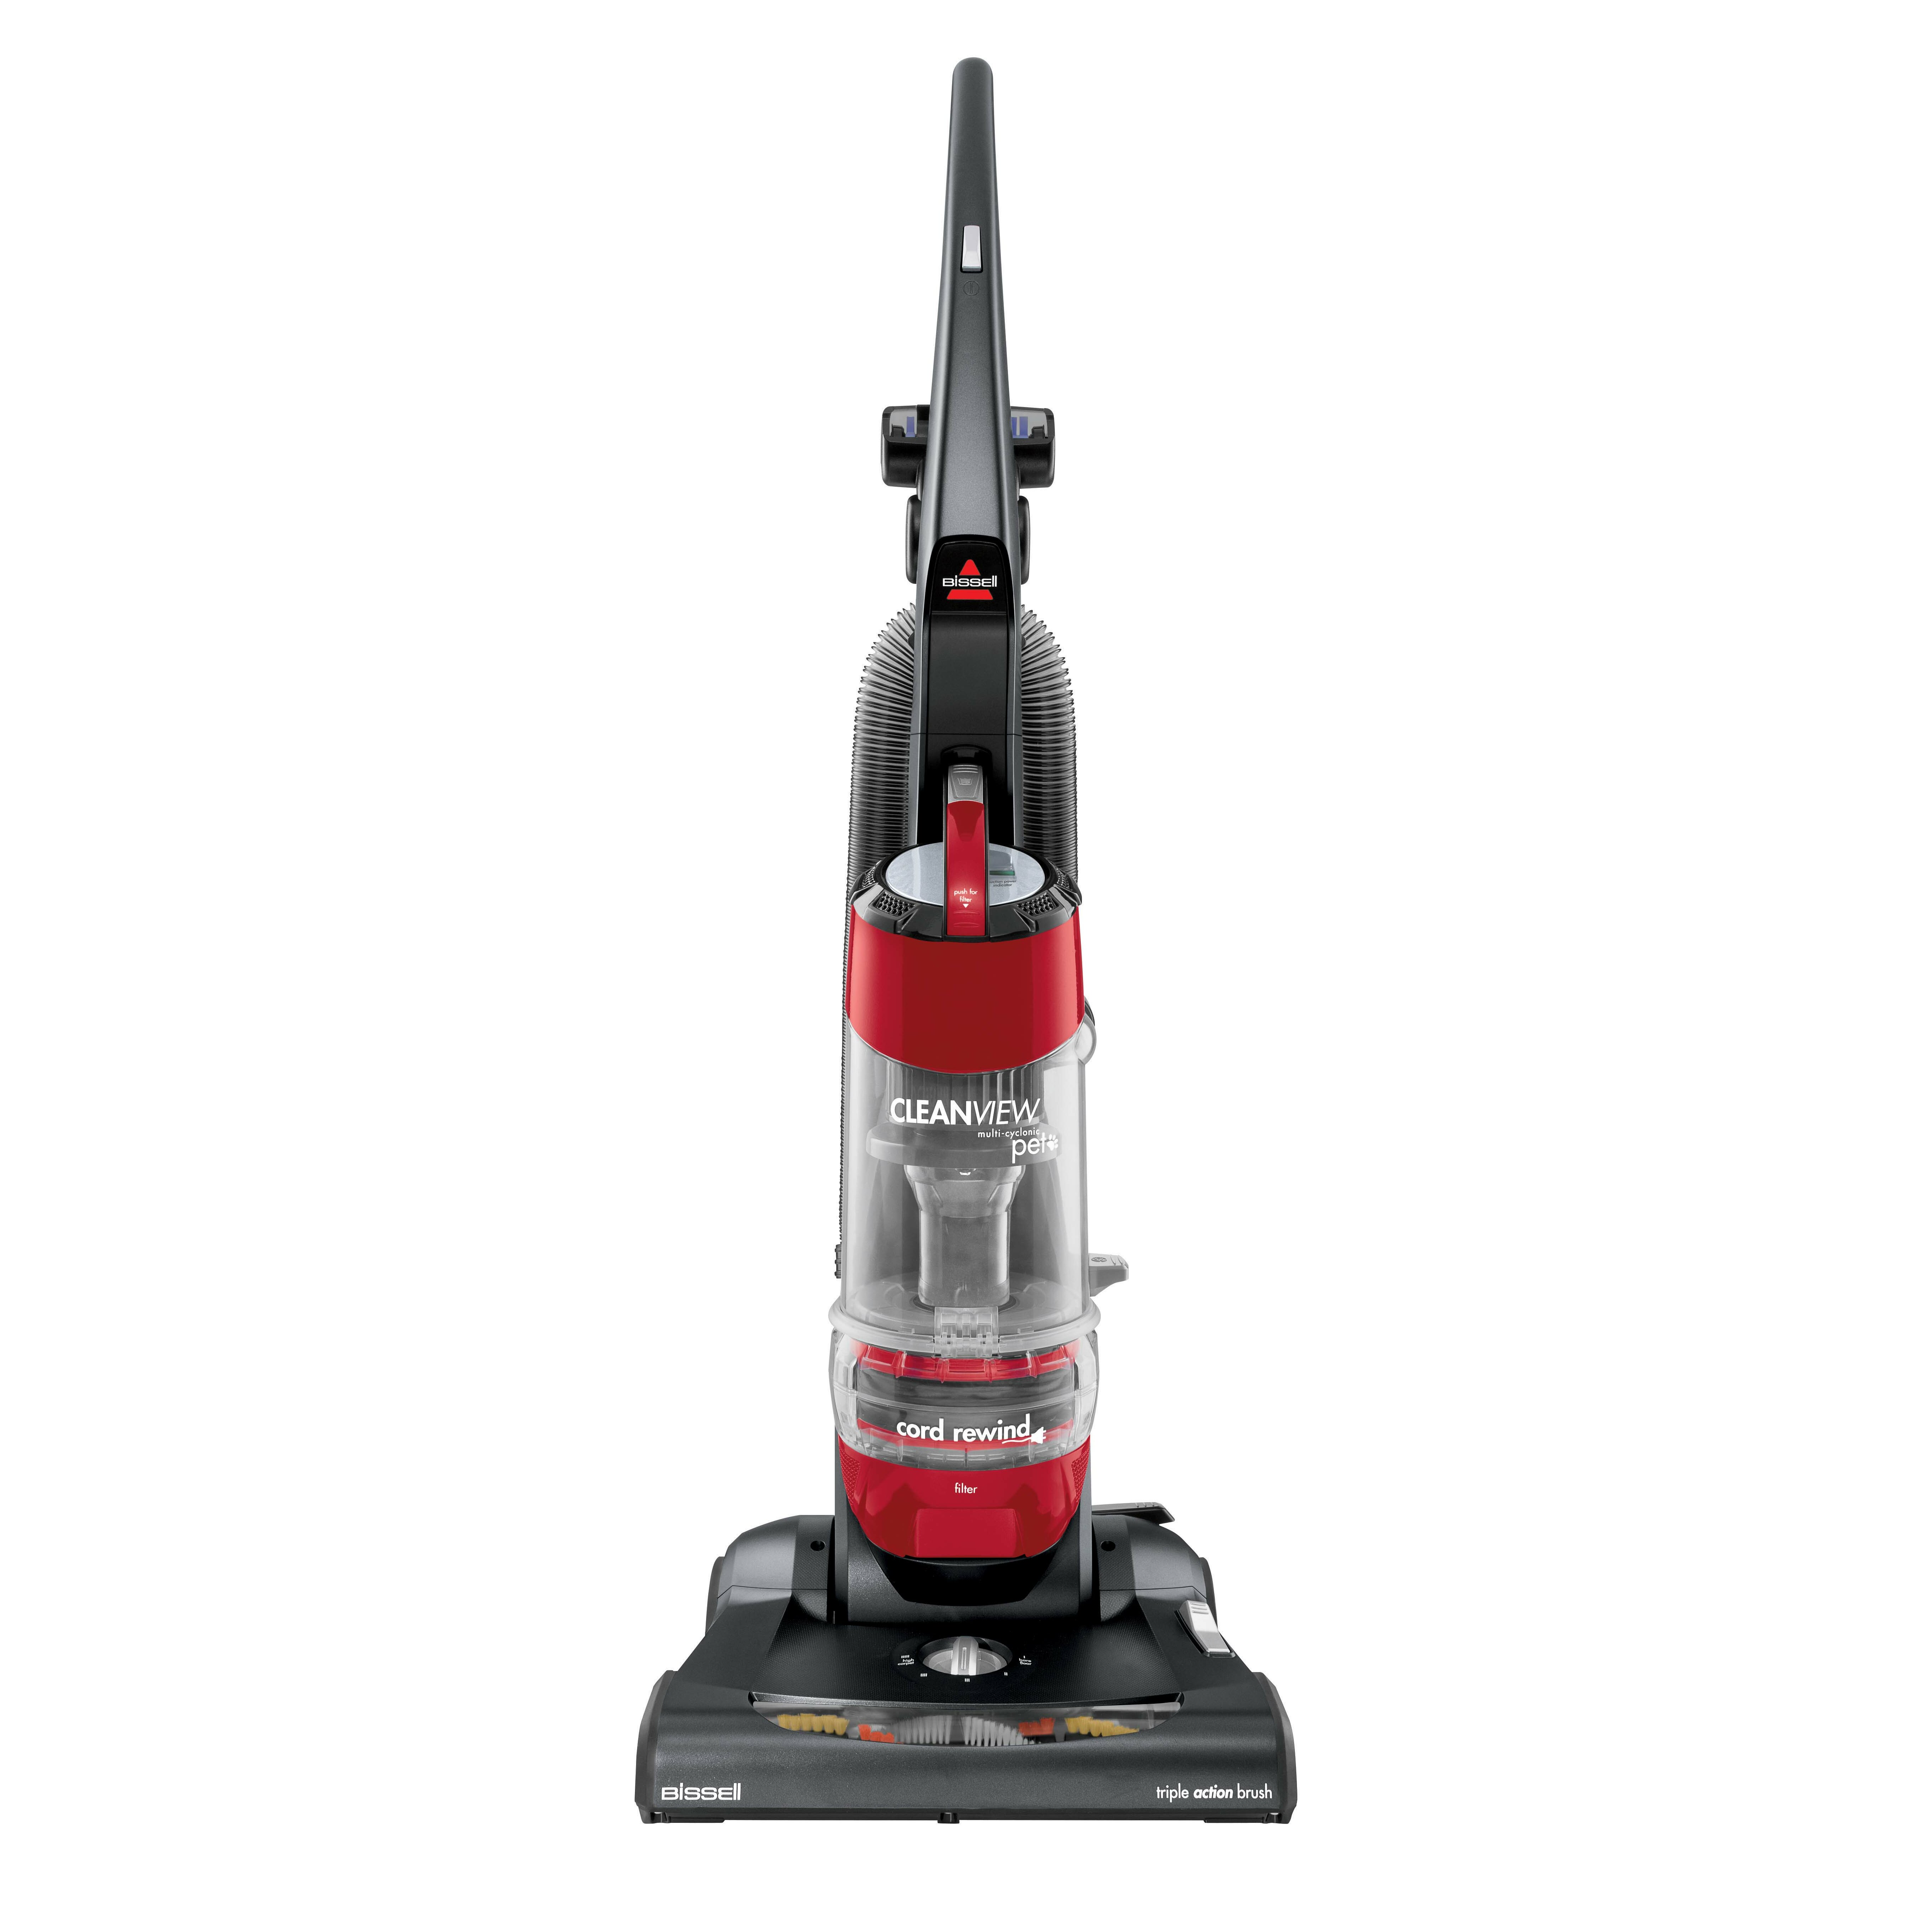 bissell cleanview rewind pet model 2383